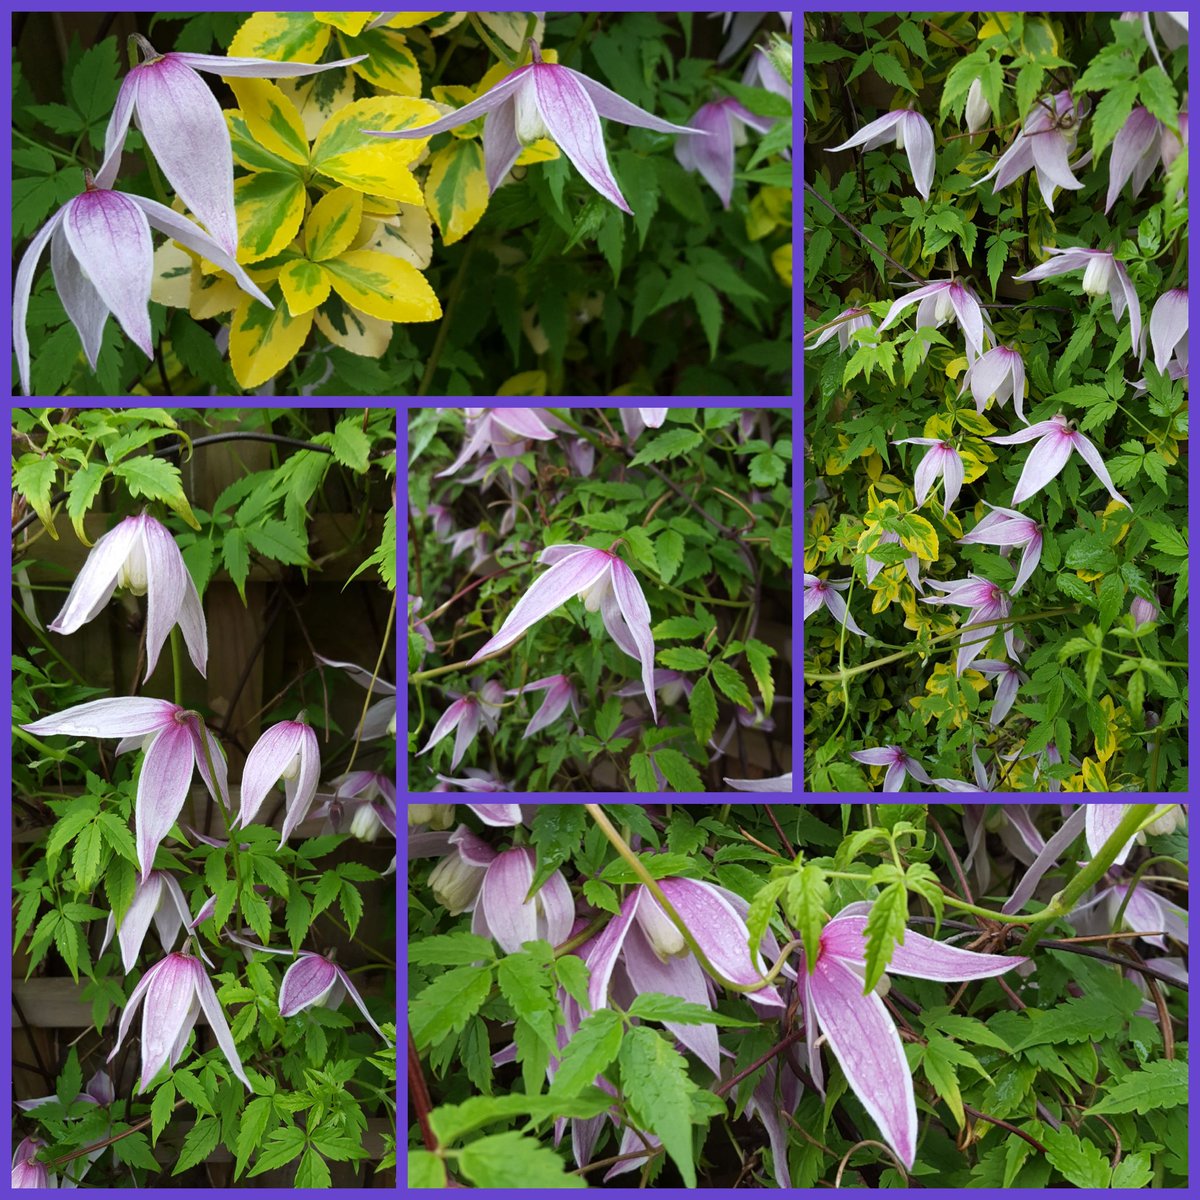 A frosty morning in North Yorkshire.
My clematis alpina are in a sheltered place and here's one of the prettiest Clematis Alpina 'Willy'  feeling cold but still managing to look lovely for #ClematisThursday
After being outside, I need a bowl of porridge!